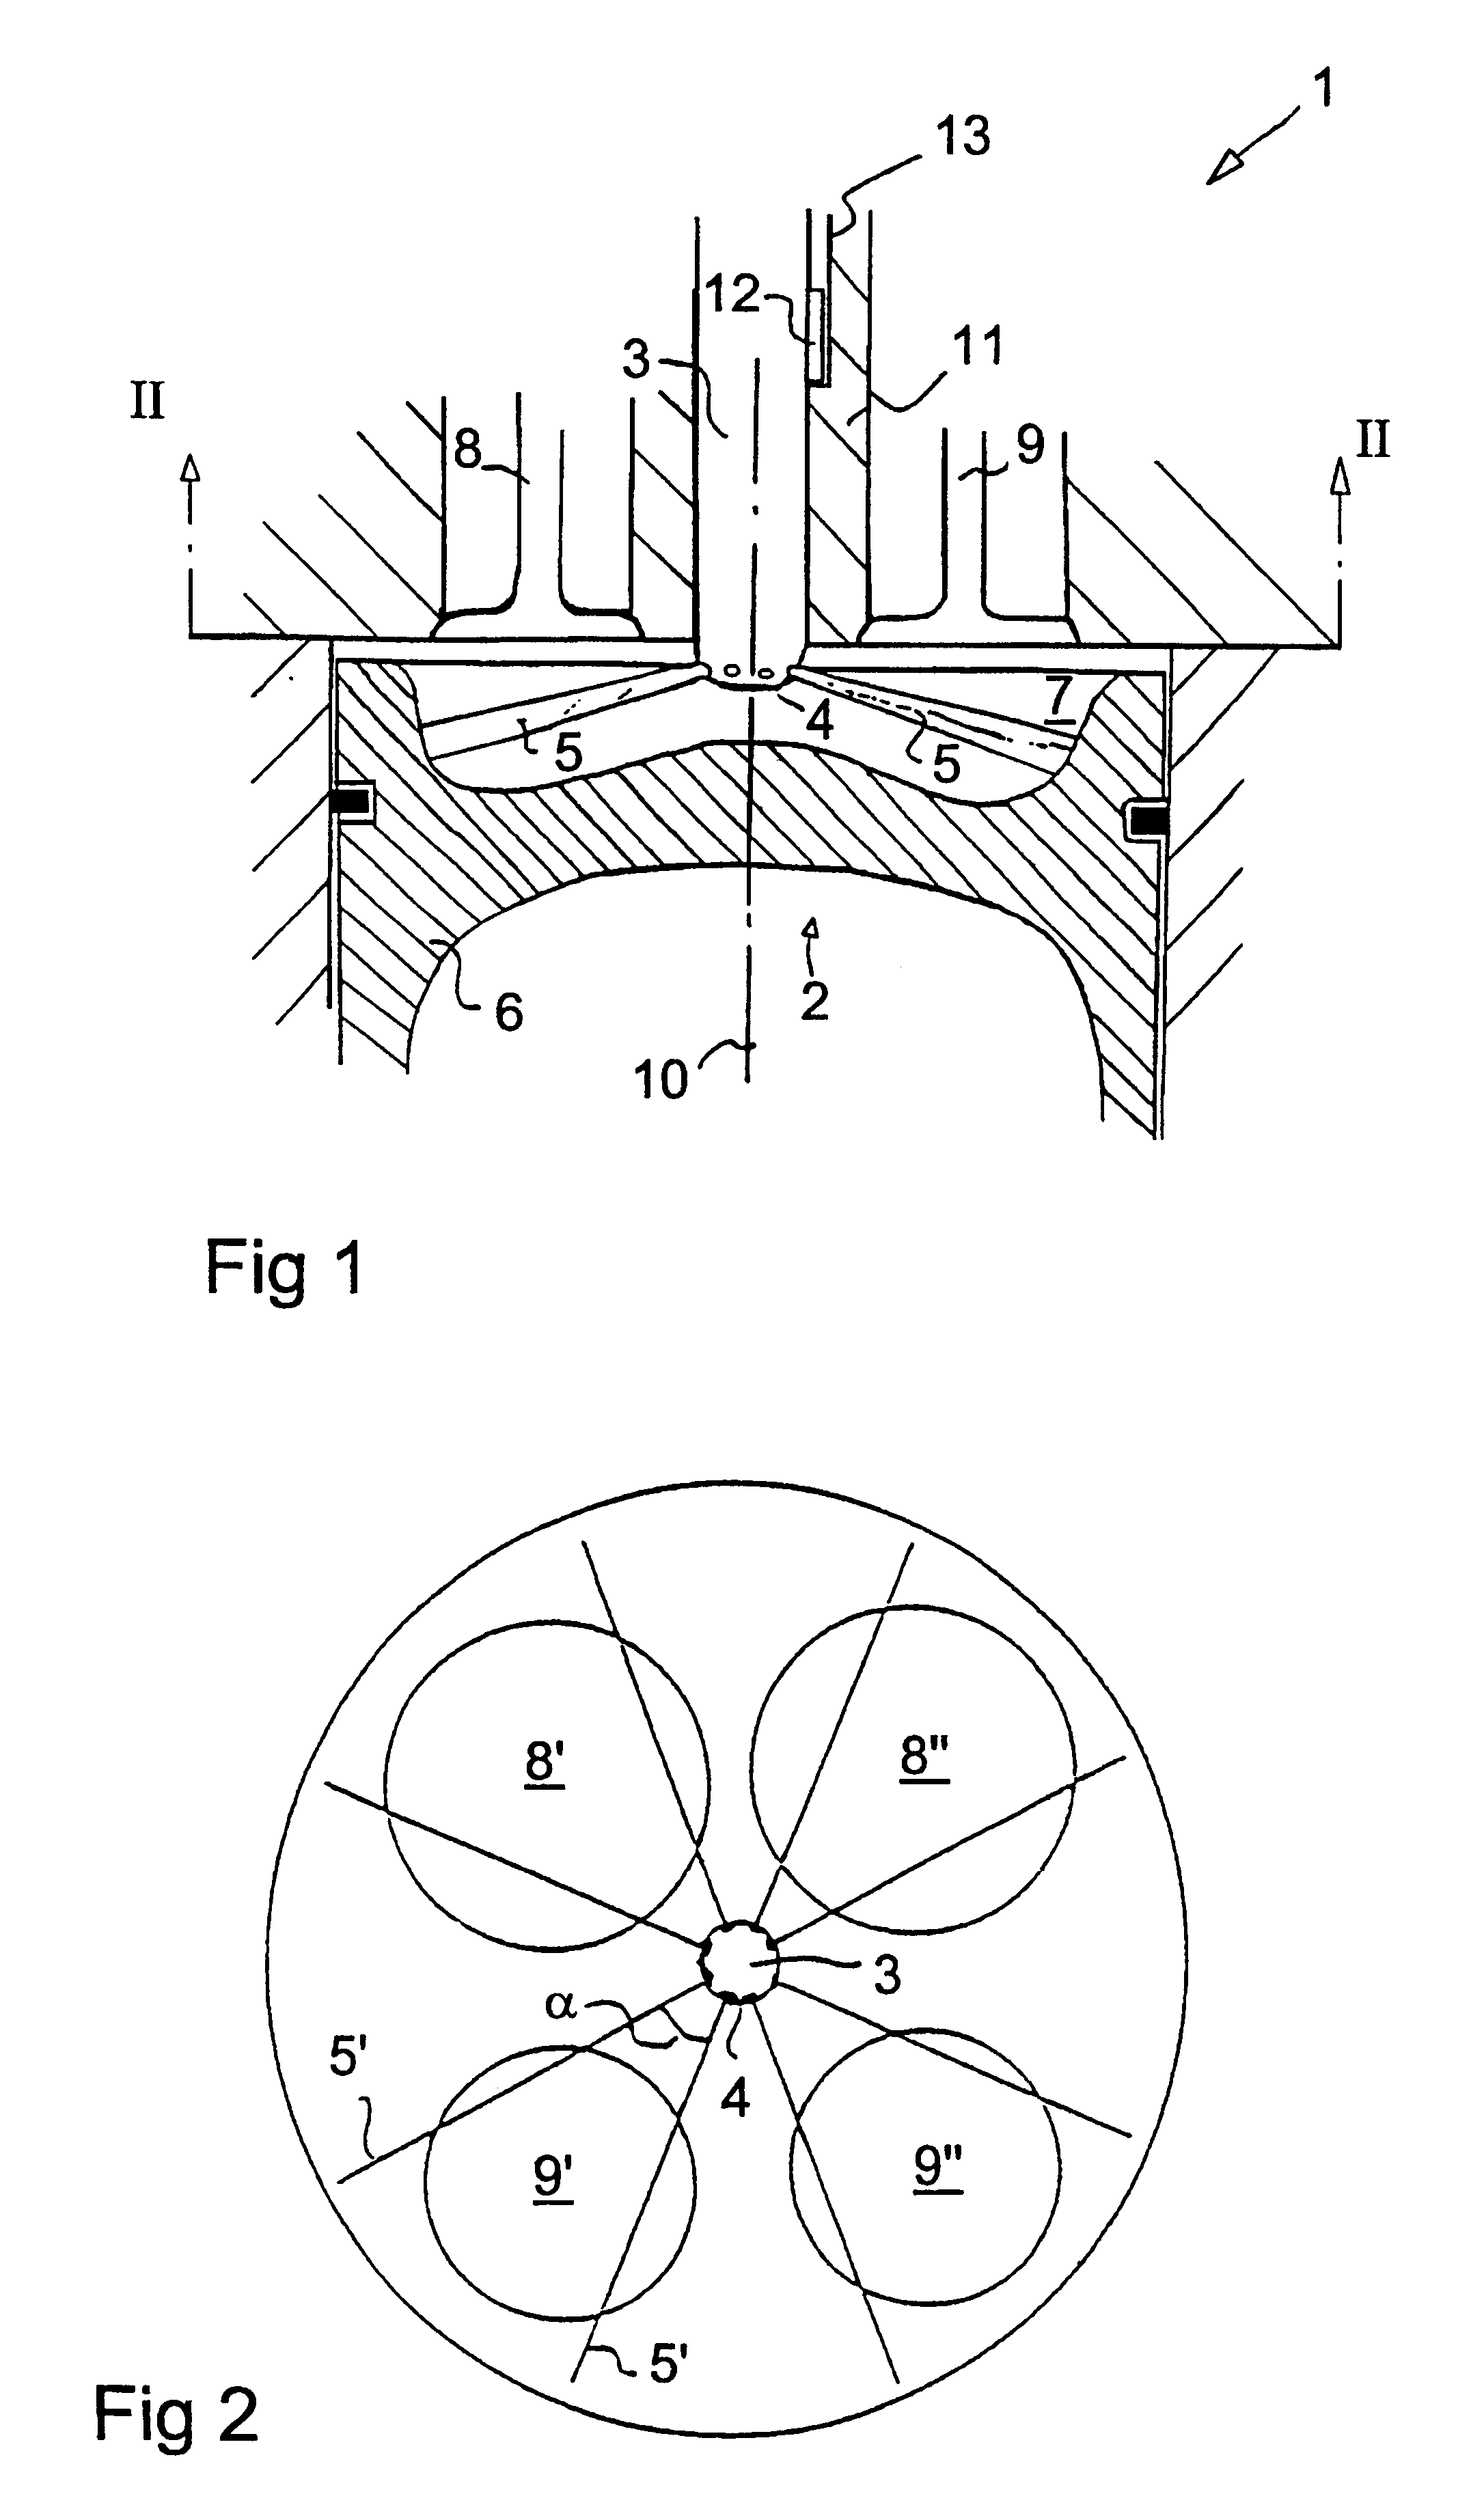 Internal combustion engine with fuel injection